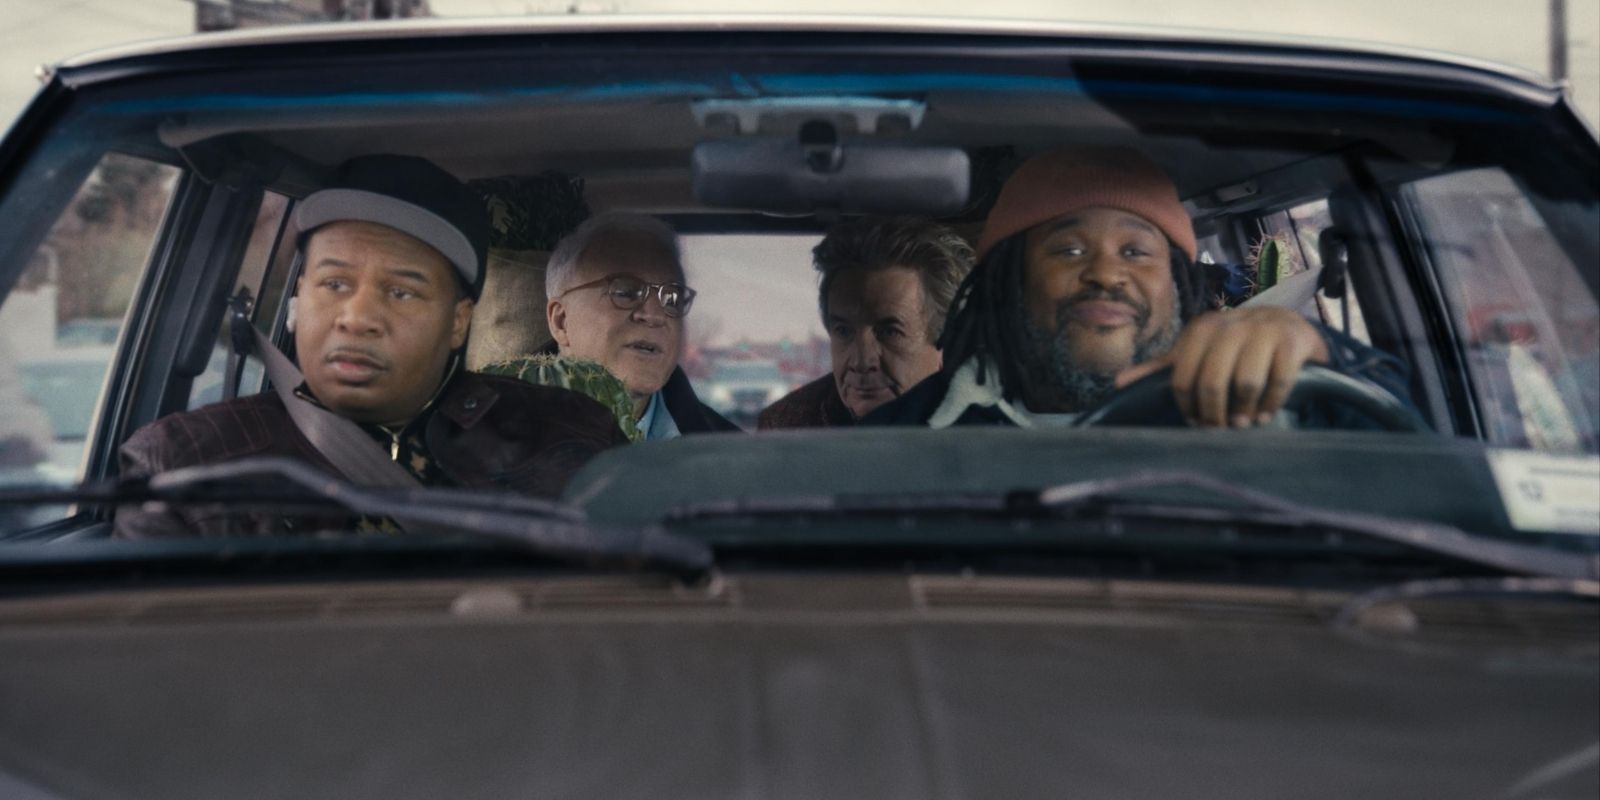 Roy Wood Jr and Jacob Ming Trent drive with Charles and Oliver in the backseat in Only Murders in the Building